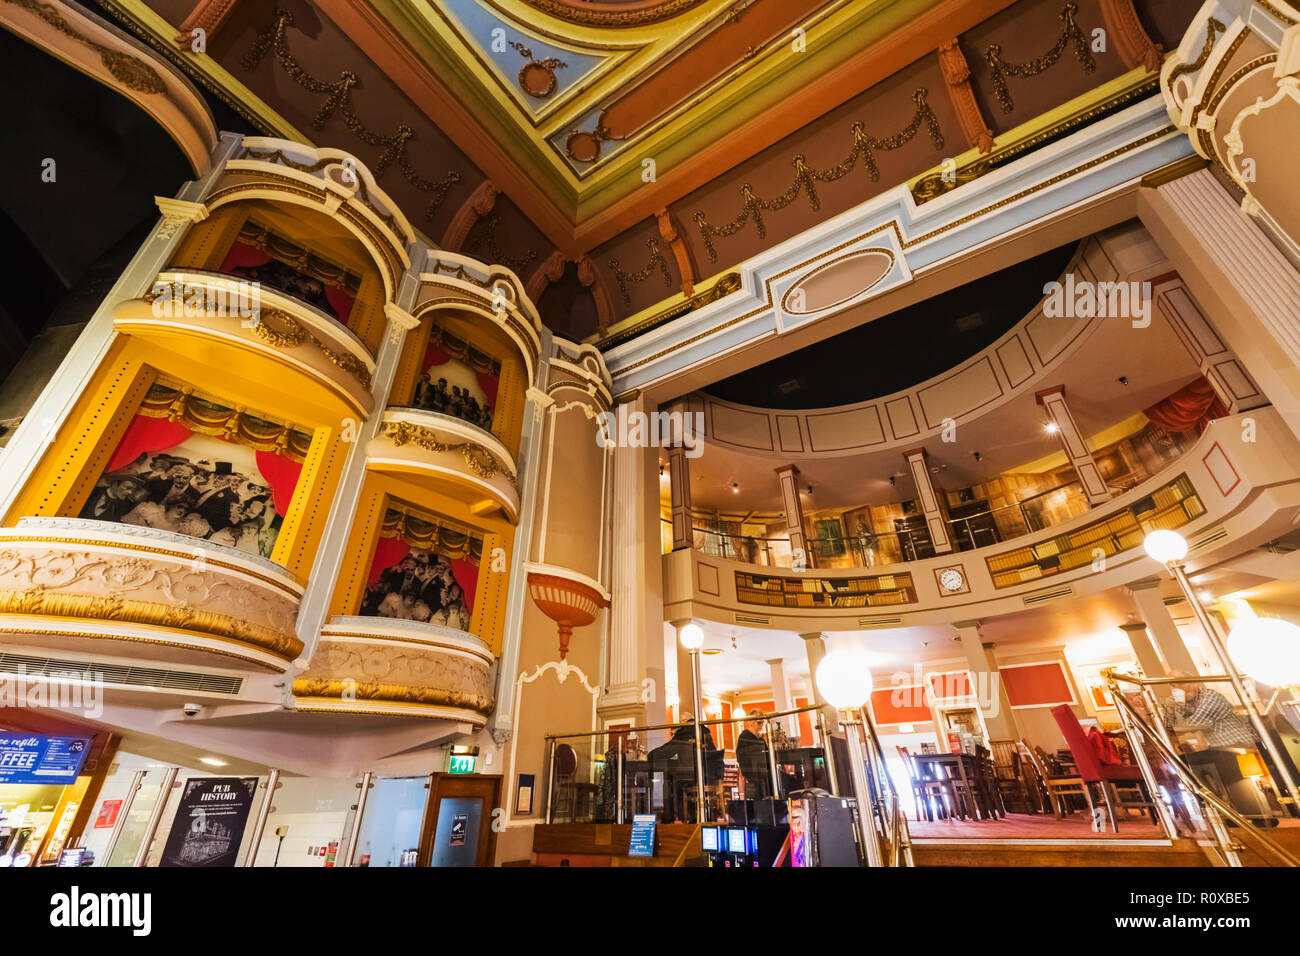 The Palladium Pub High Resolution Stock Photography and Images - Alamy